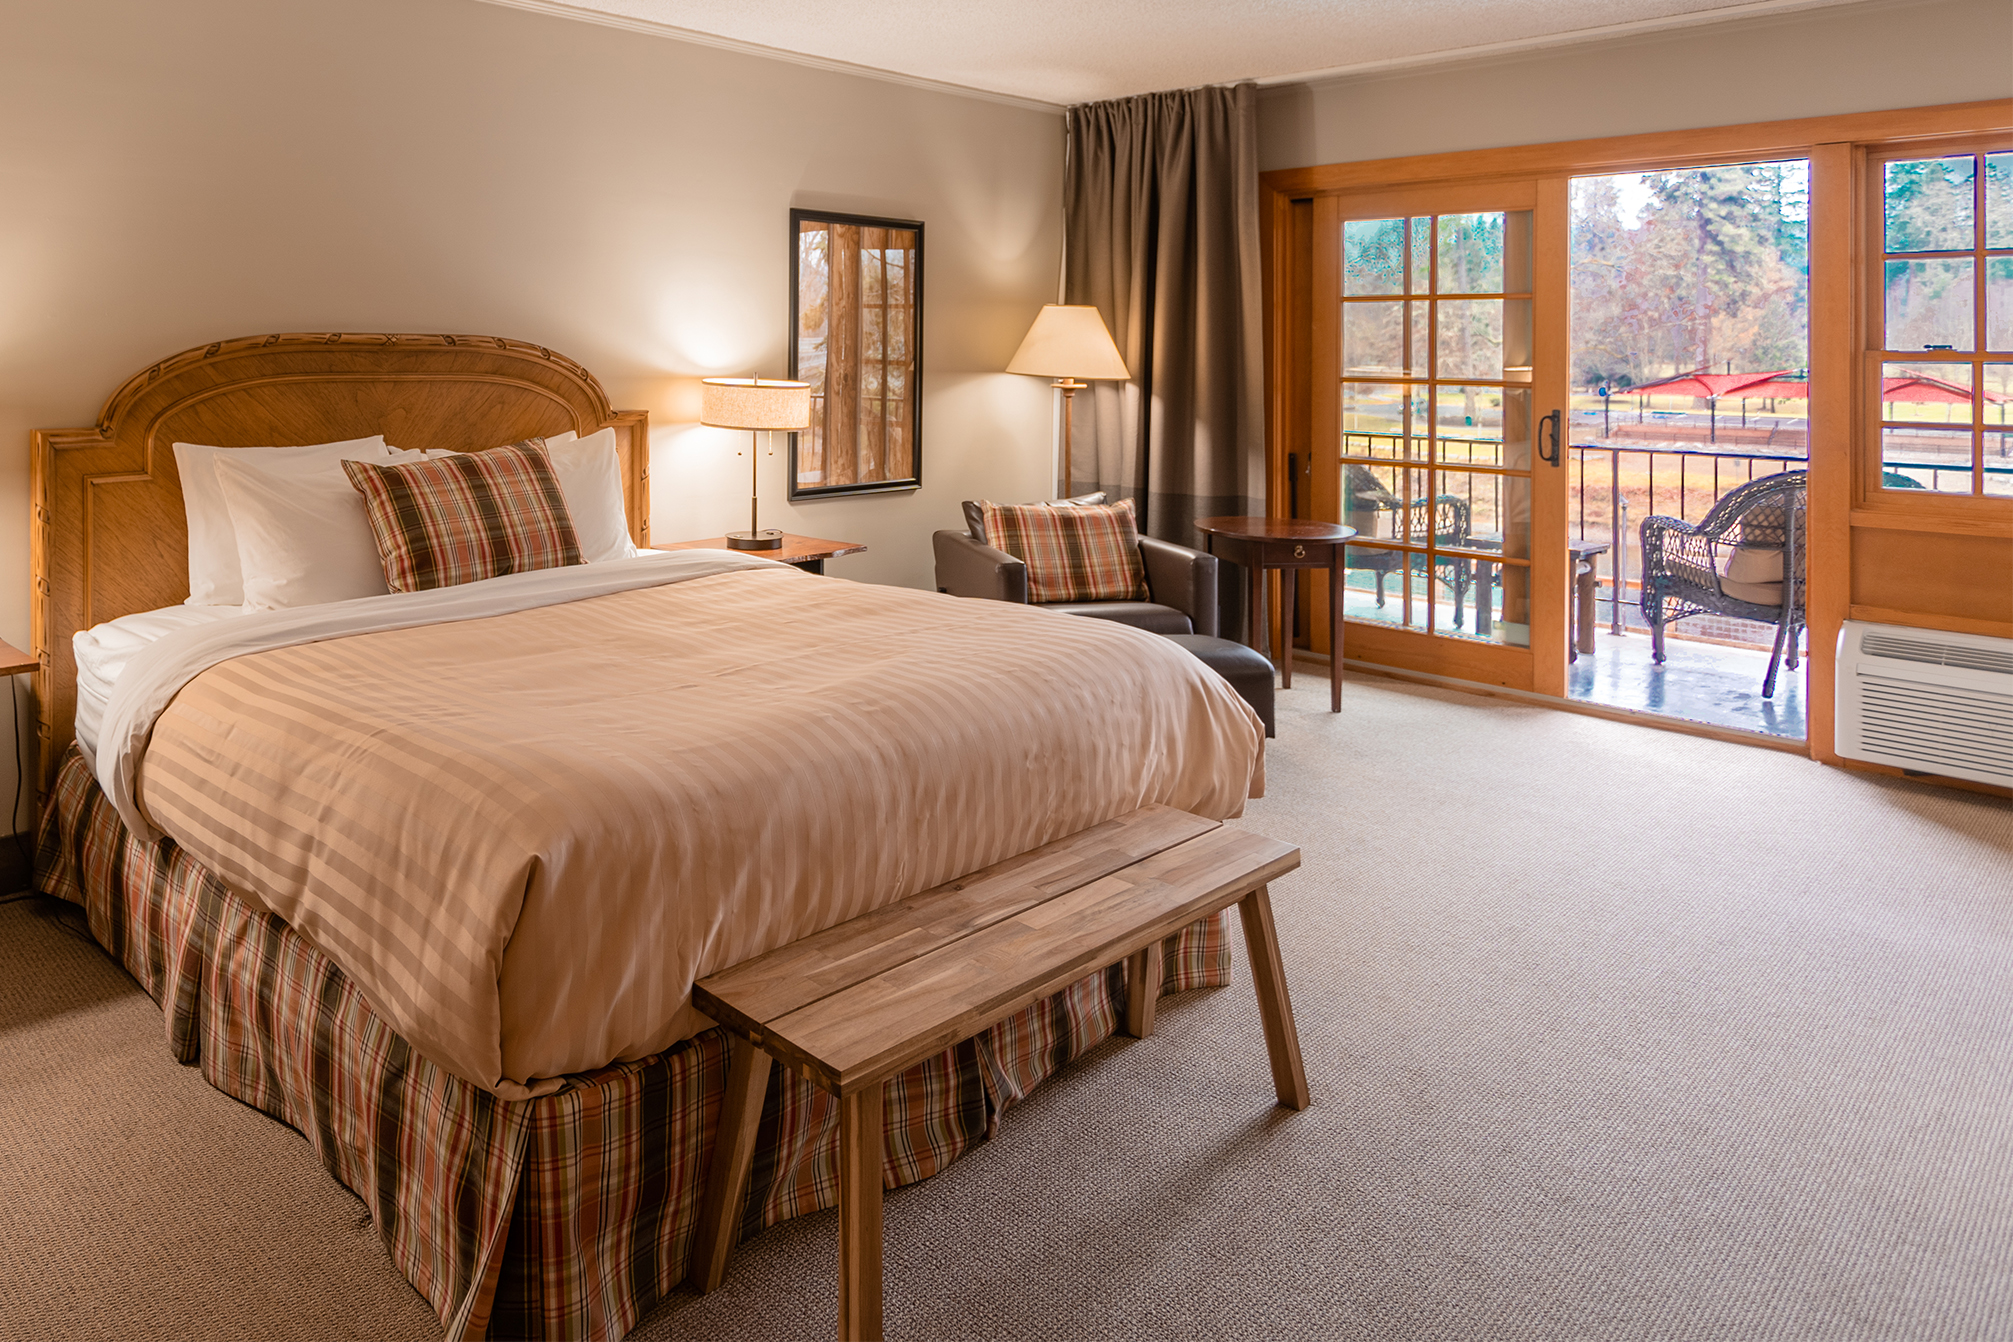 The deluxe king room with a king bed, bench footboard, chair, ottoman side table and wood trimmed sliding glass door to the balcony overlooking the Rogue River and Riverside Park across the river